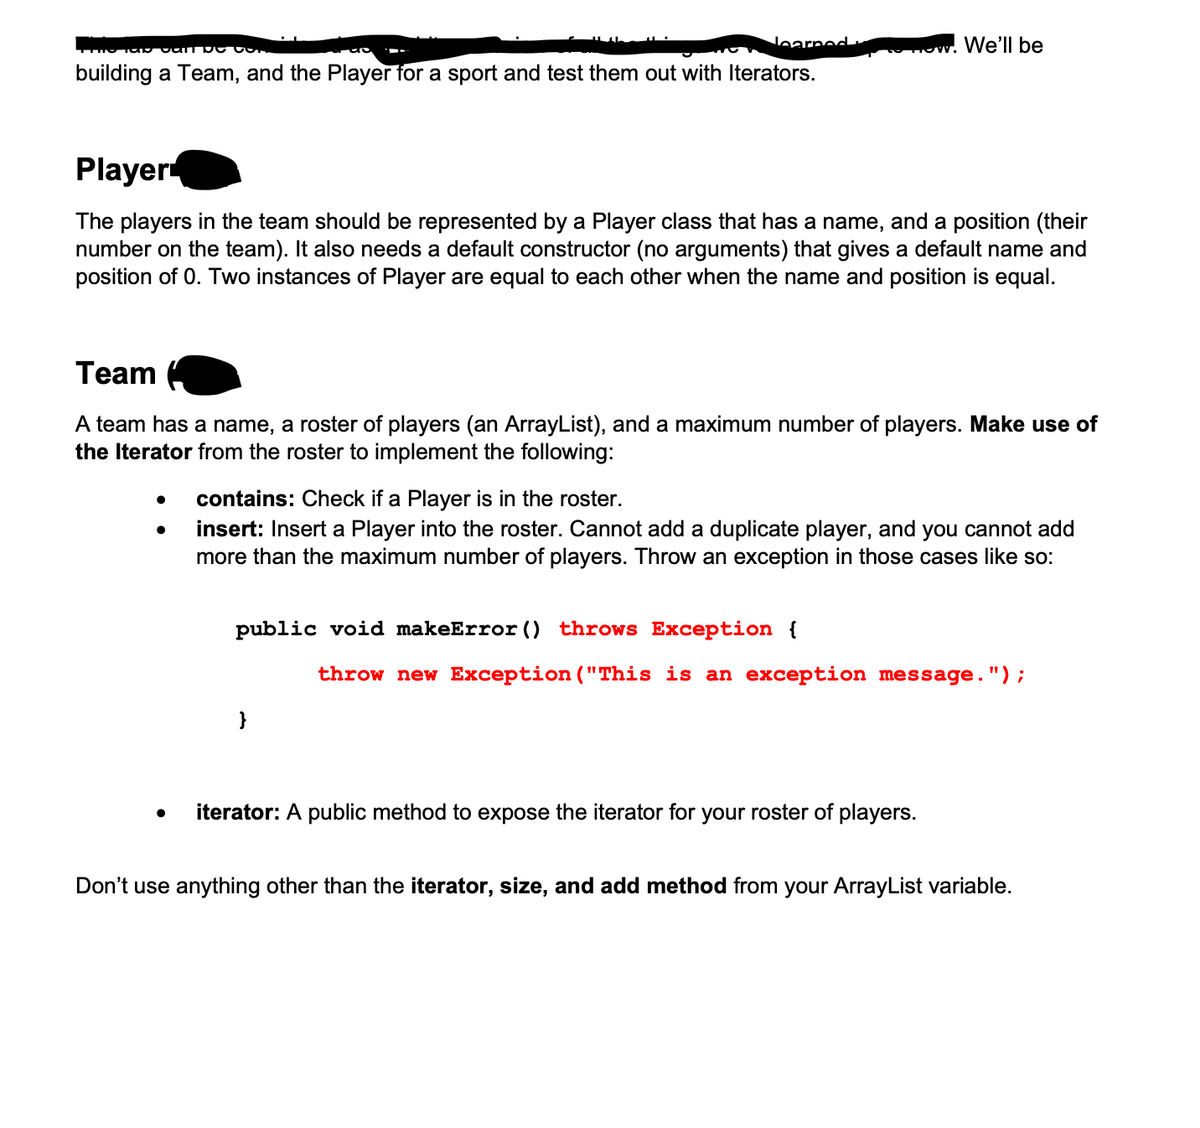 learned
building a Team, and the Player for a sport and test them out with Iterators.
Player
The players in the team should be represented by a Player class that has a name, and a position (their
number on the team). It also needs a default constructor (no arguments) that gives a default name and
position of 0. Two instances of Player are equal to each other when the name and position is equal.
Team
A team has a name, a roster of players (an ArrayList), and a maximum number of players. Make use of
the Iterator from the roster to implement the following:
We'll be
contains: Check if a Player is in the roster.
insert: Insert a Player into the roster. Cannot add a duplicate player, and you cannot add
more than the maximum number of players. Throw an exception in those cases like so:
public void makeError () throws Exception {
}
throw new Exception ("This is an exception message.");
iterator: A public method to expose the iterator for your roster of players.
Don't use anything other than the iterator, size, and add method from your ArrayList variable.